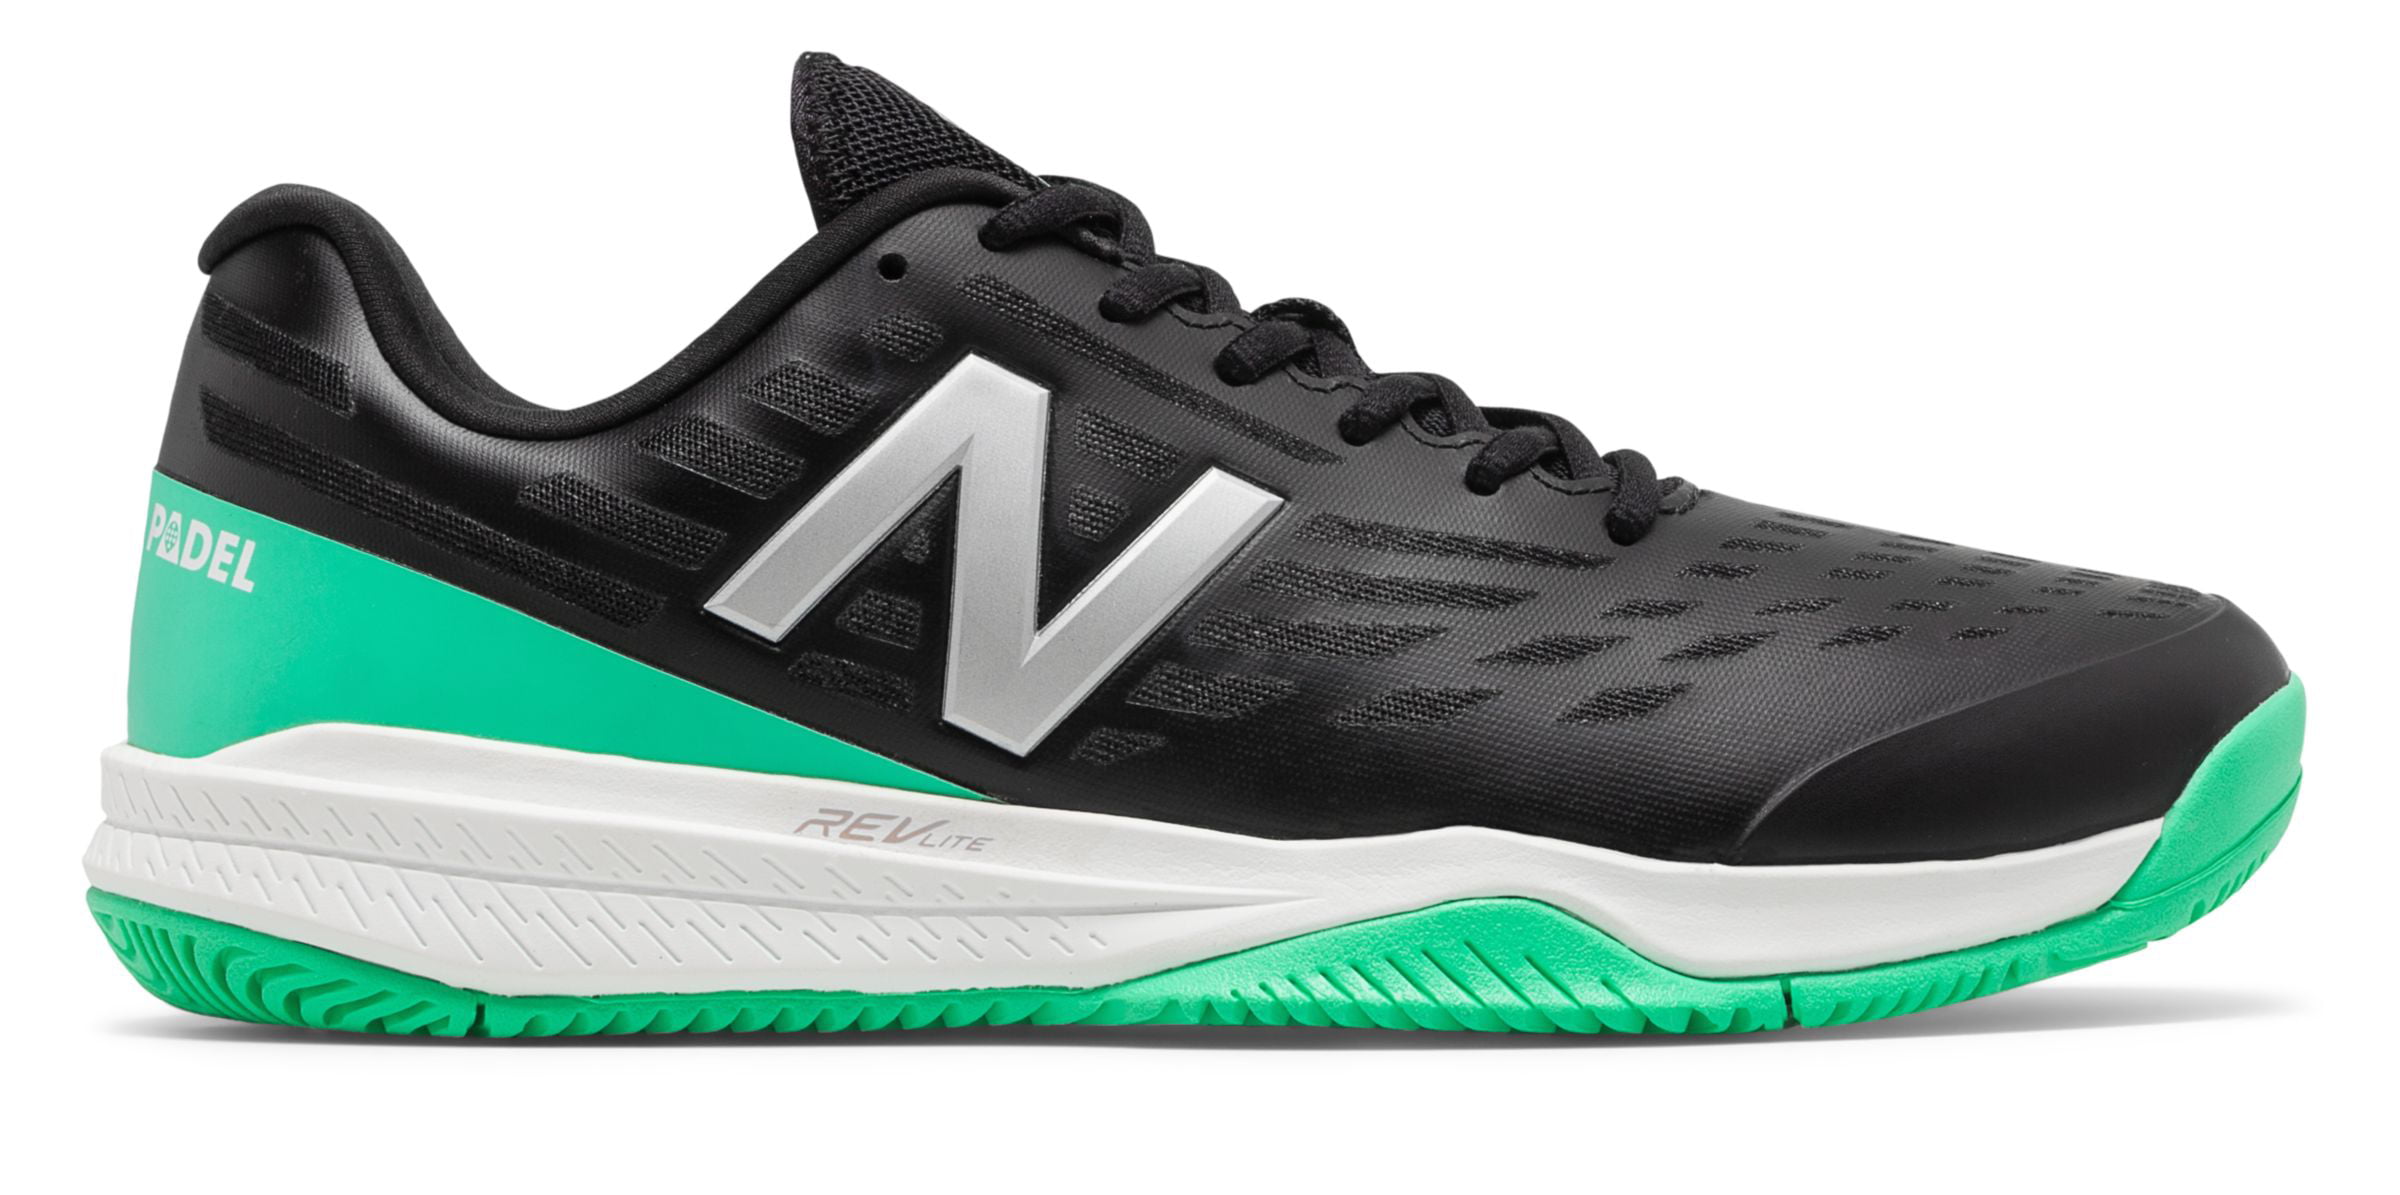 New Balance Men's 796 Tennis Shoes Black with Green